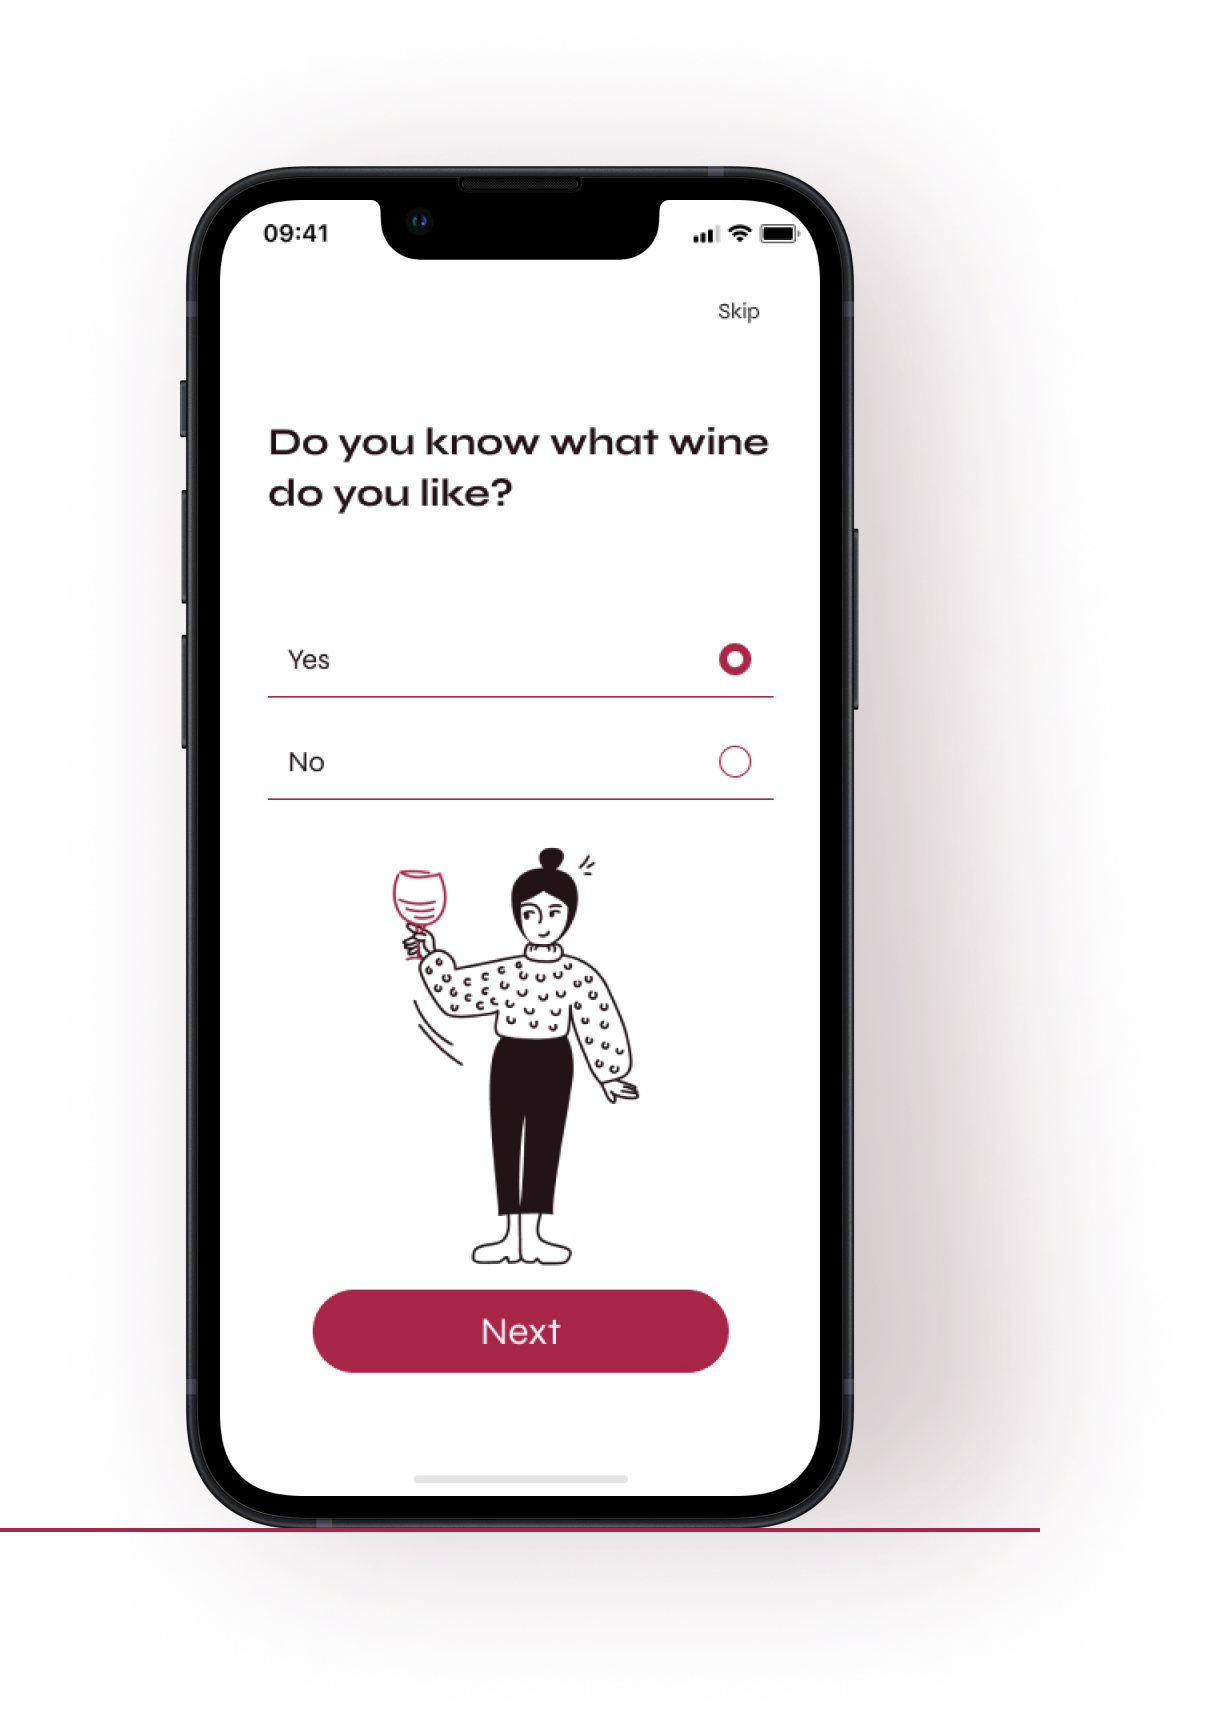 Get personalized wine recommendations based on your preferences